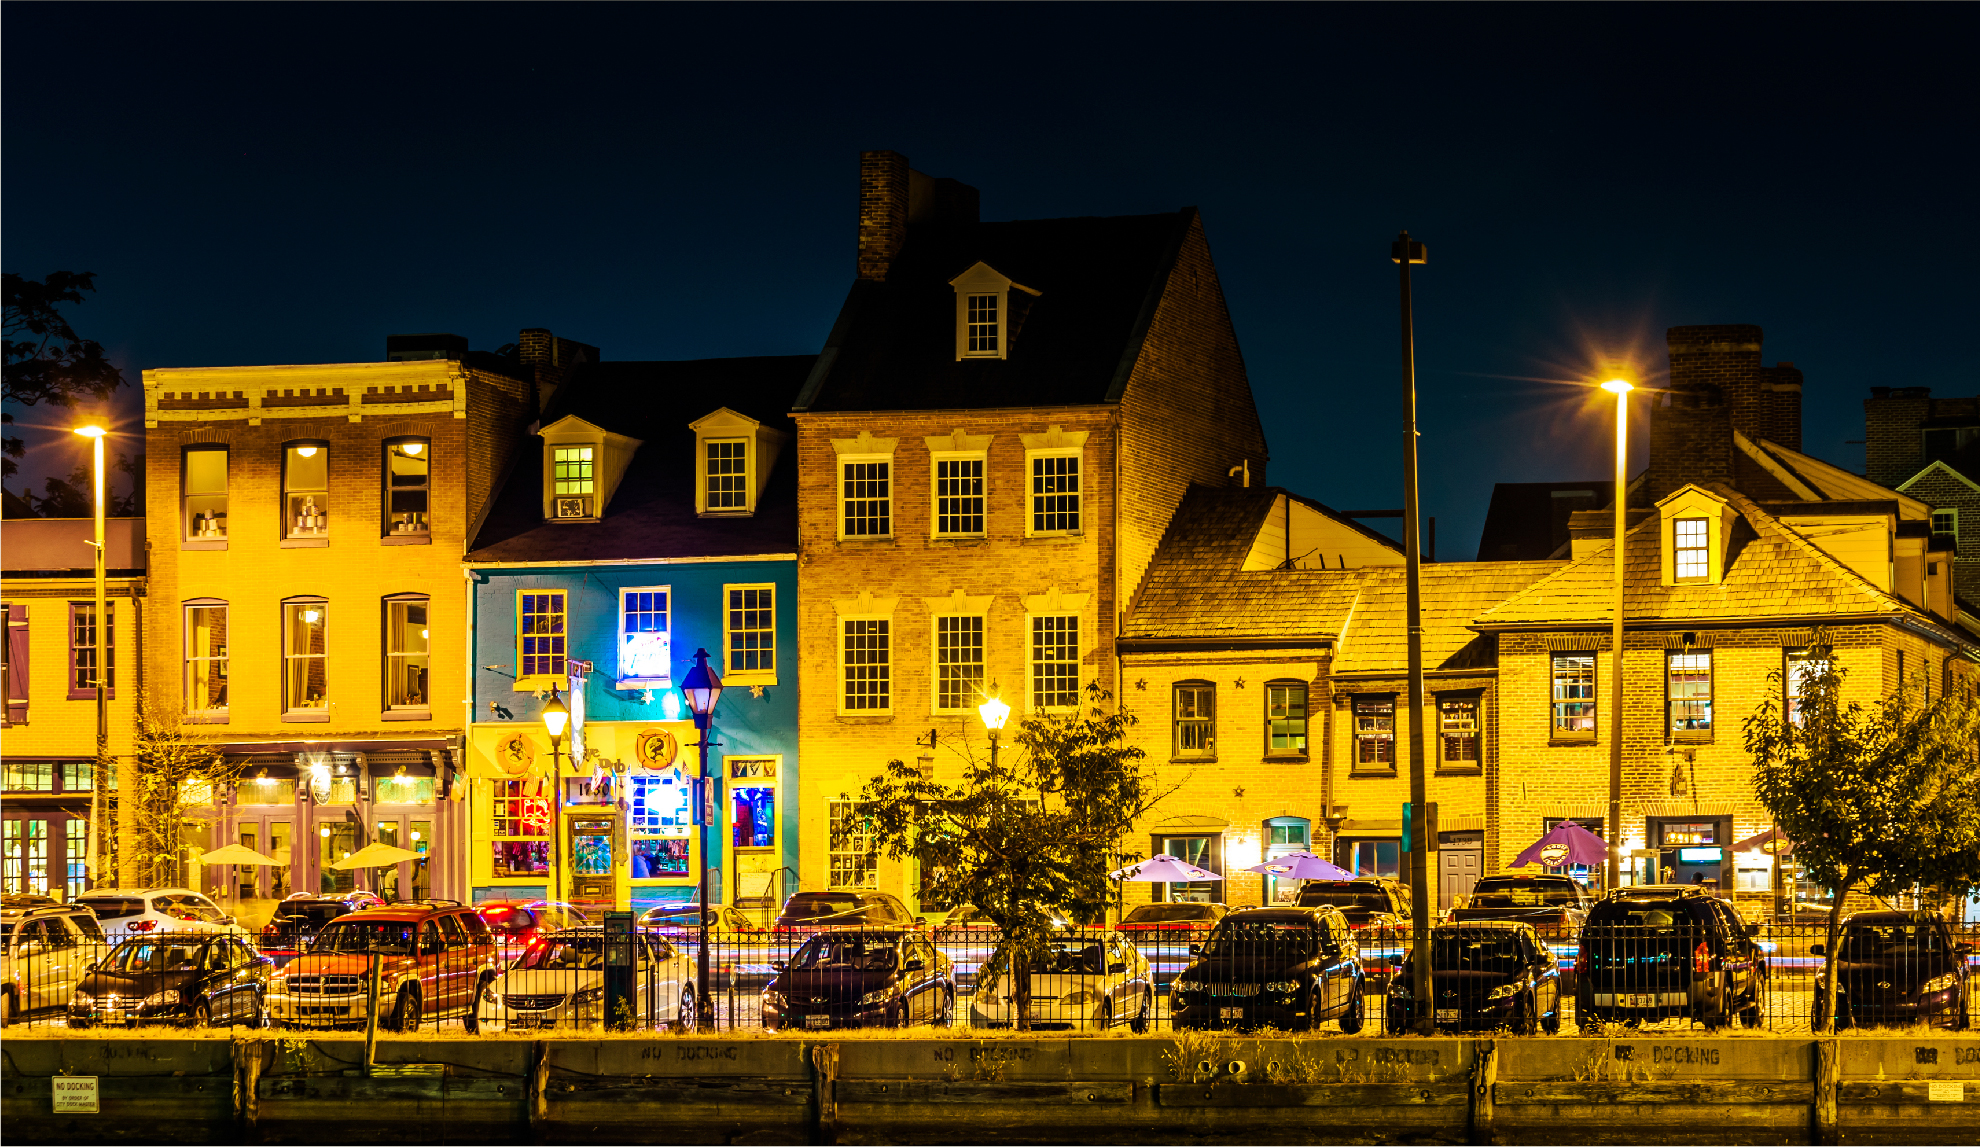 fells point street at night in baltimore